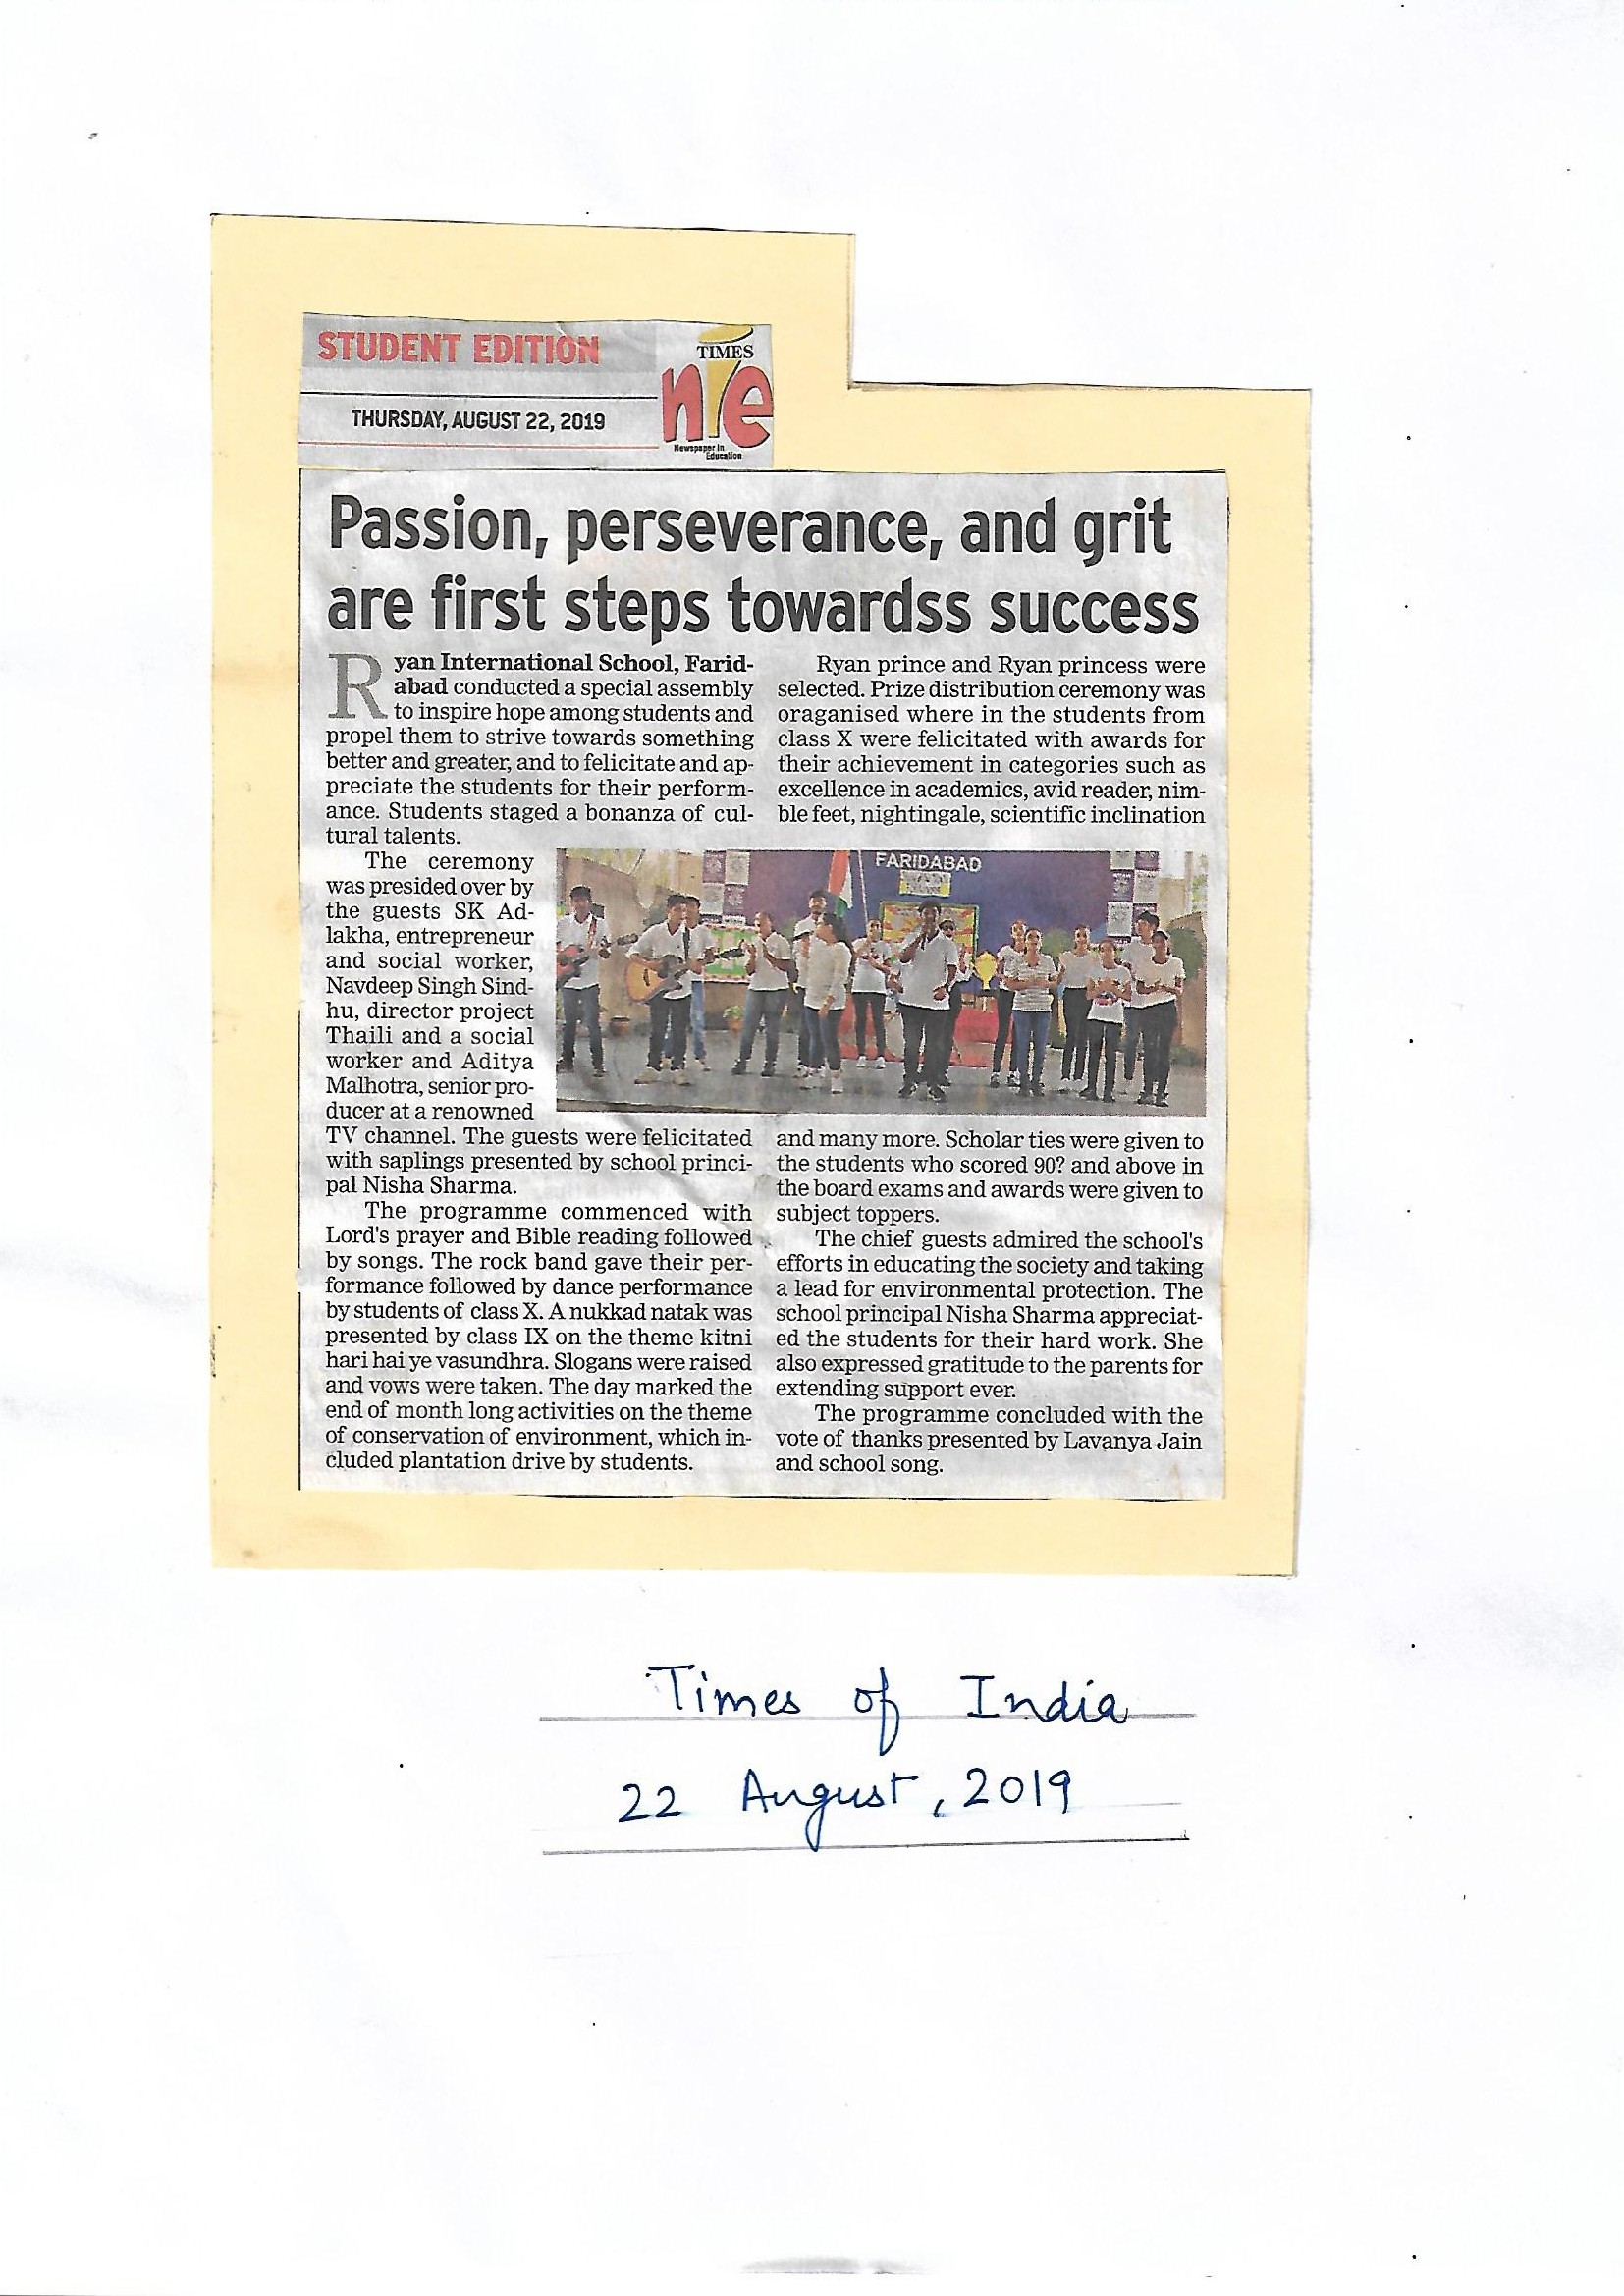 Passion, perseverance, and grit are first steps towards success - Ryan International School, Faridabad